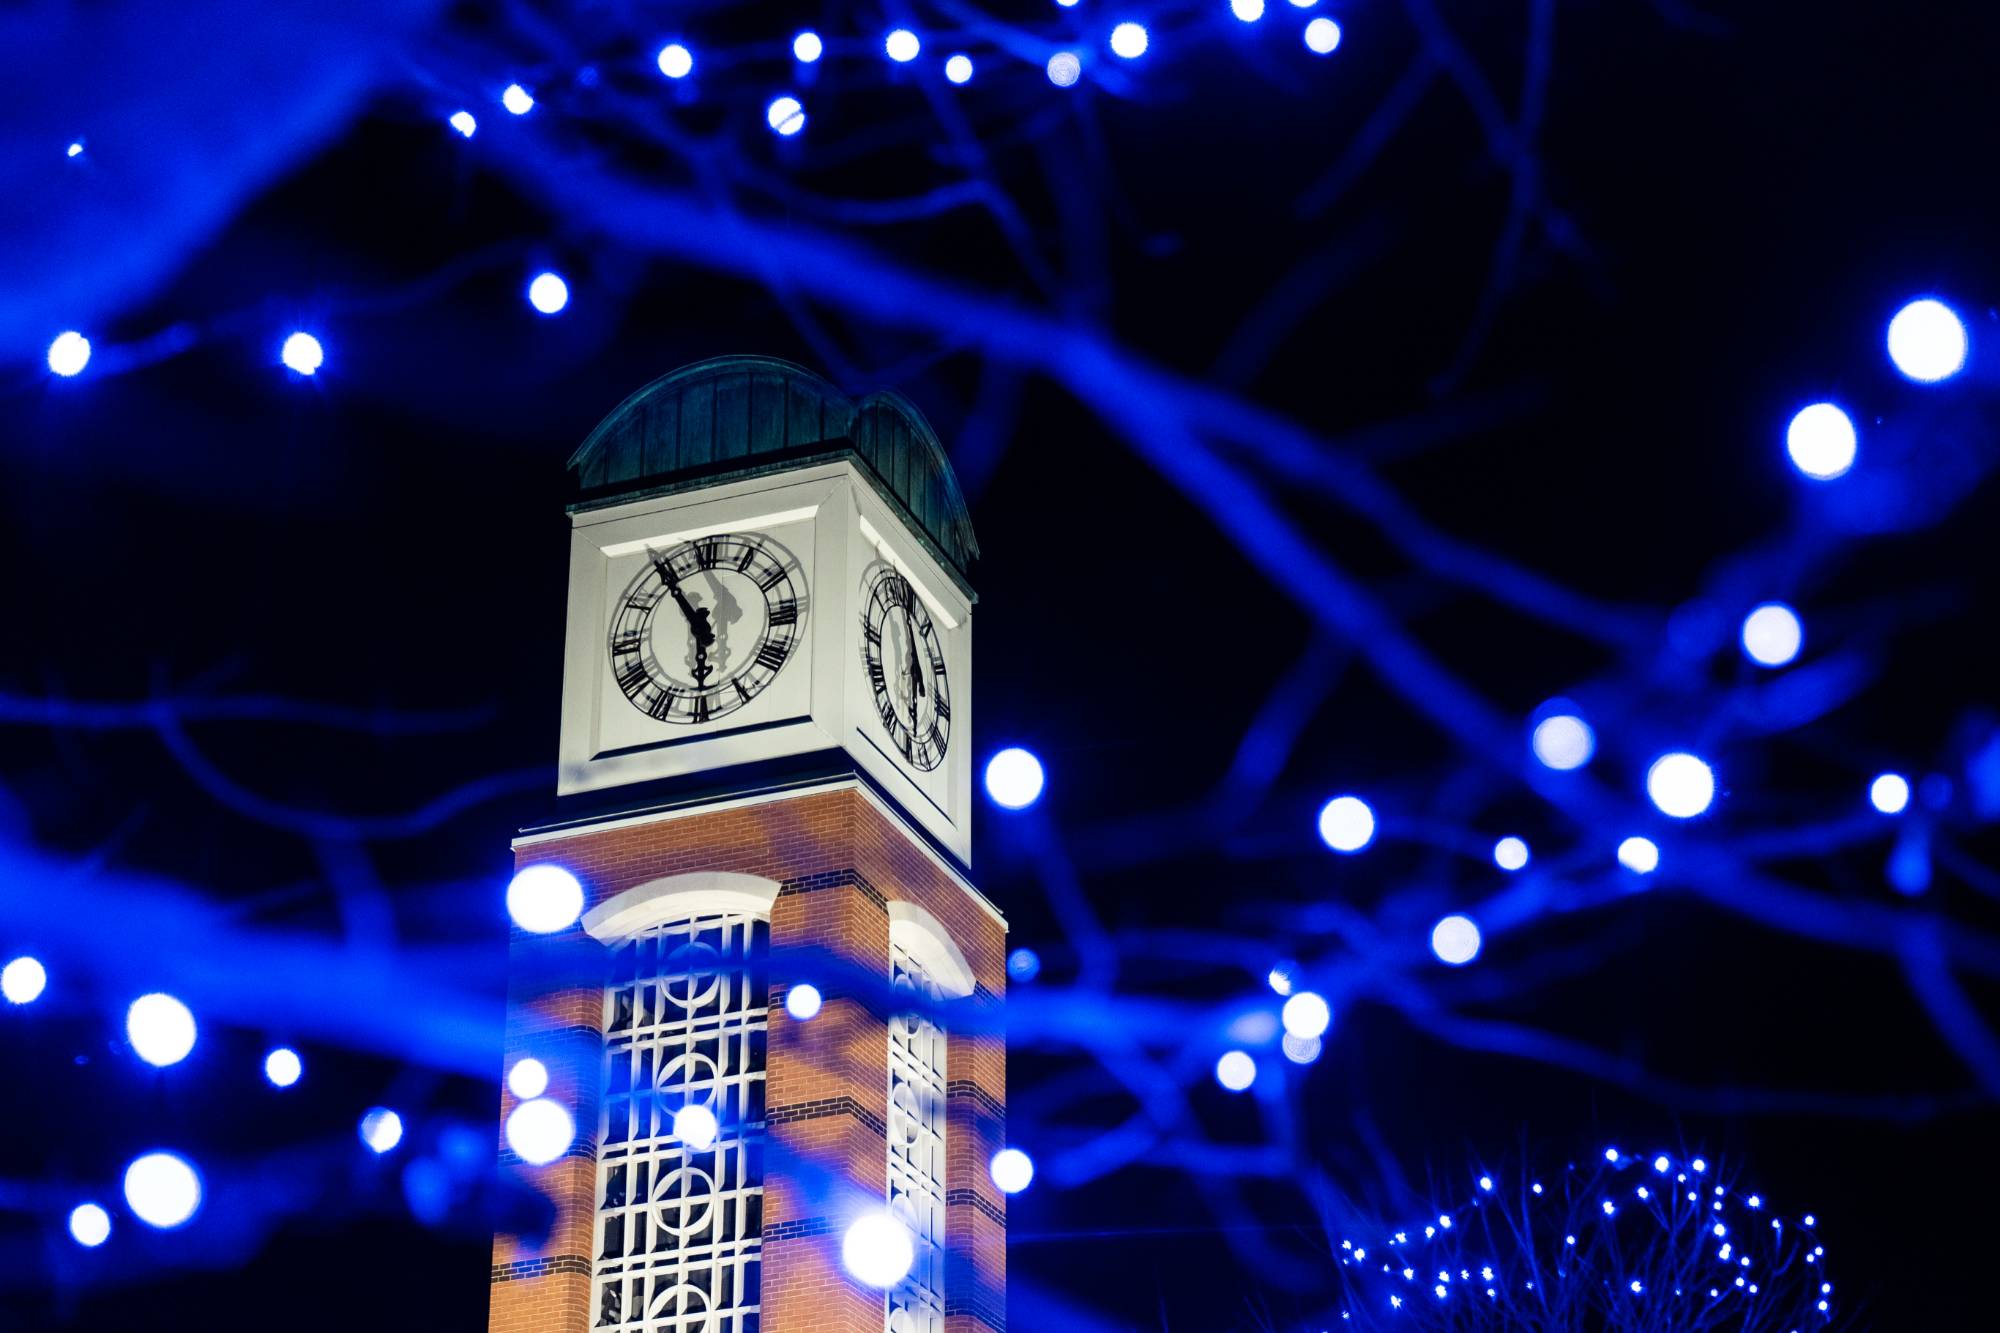 The Cook Carillon Tower surrounded by blue holiday lights